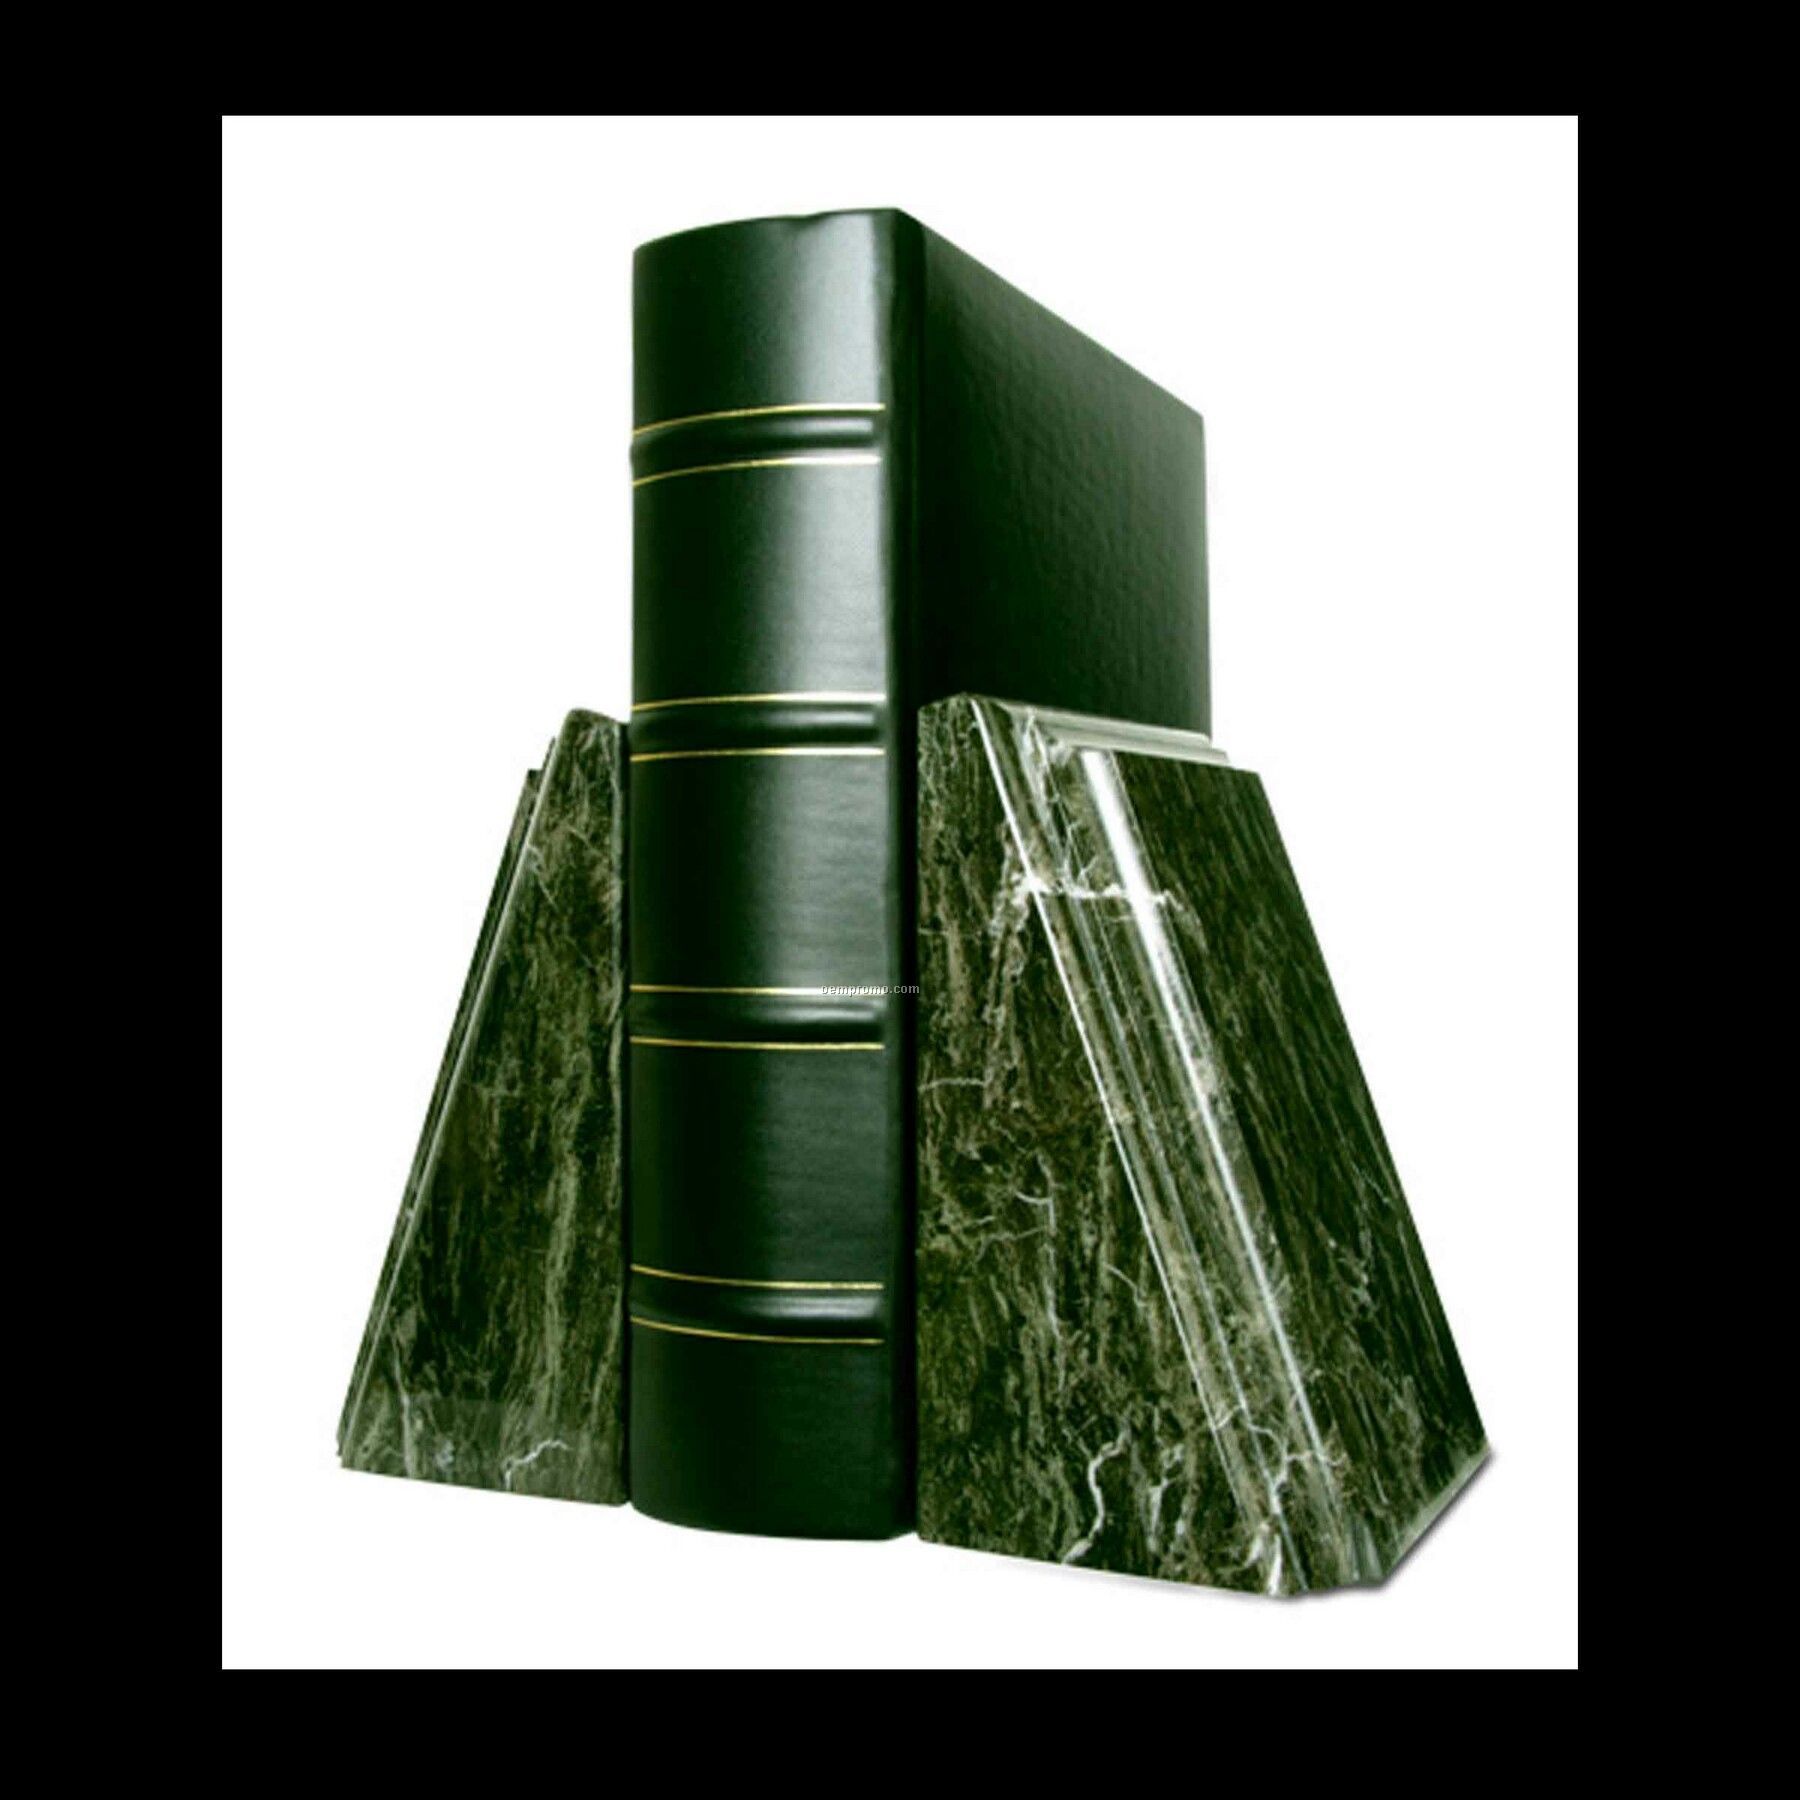 6" Jade Green Marble Book Ends W/Bevel